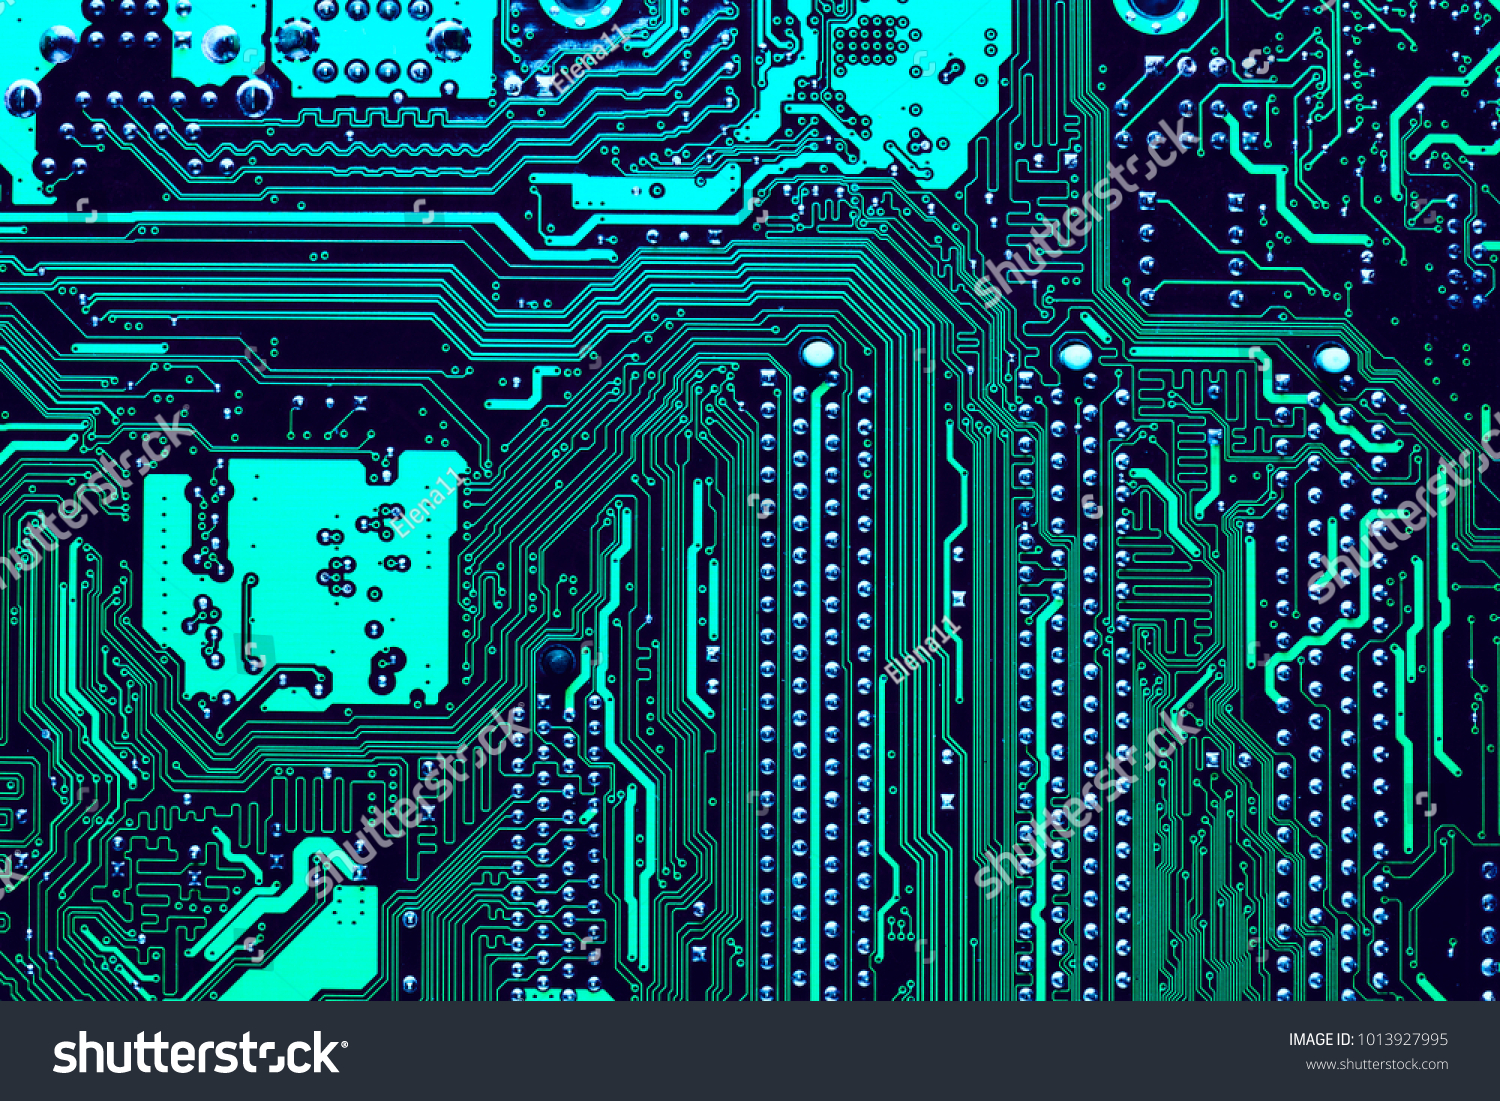 blue circuit board background of computer motherboard #1013927995